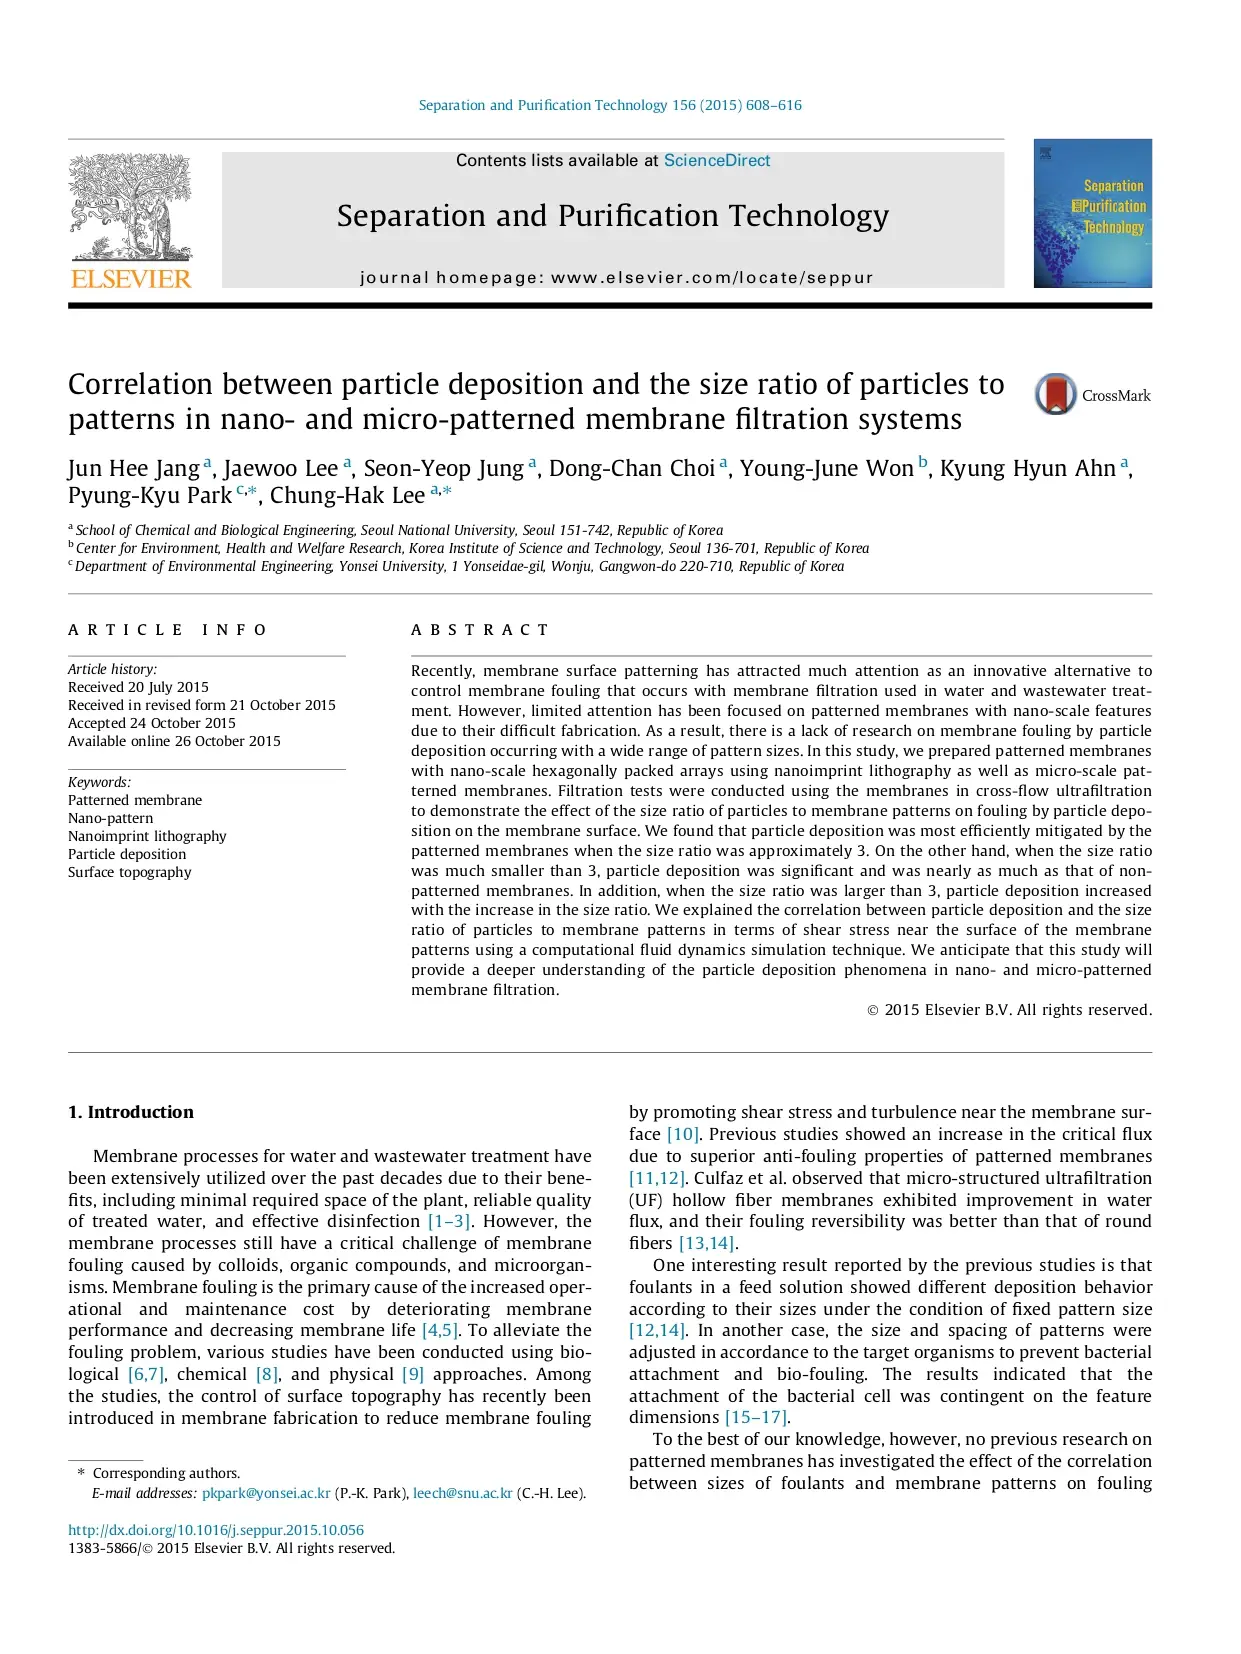 Correlation Between Particle Deposition And The Size Ratio Of Particles To Patterns In Nano- And Micro-Patterned Membrane Filtration Systems